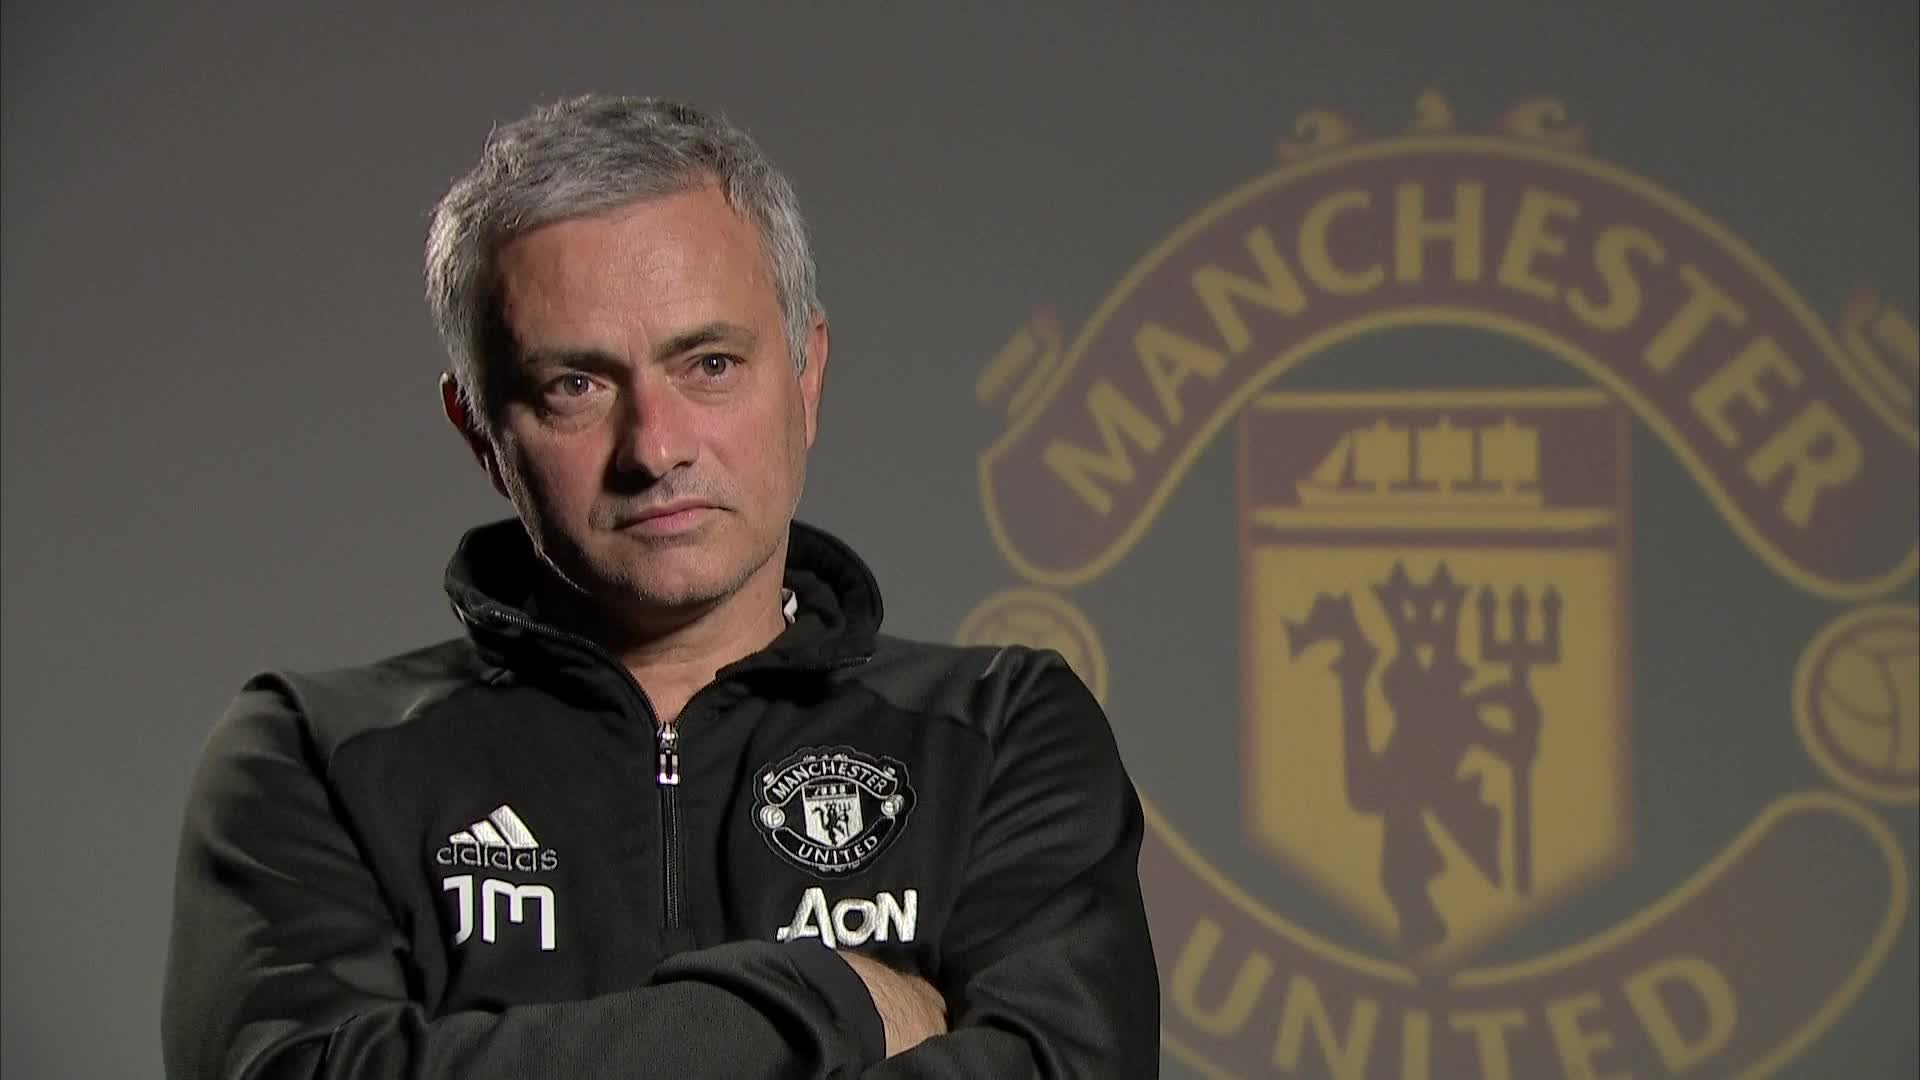 By Andy Burton And Richard Morgan - Jose Mourinho Man United Sky Sports Interview , HD Wallpaper & Backgrounds